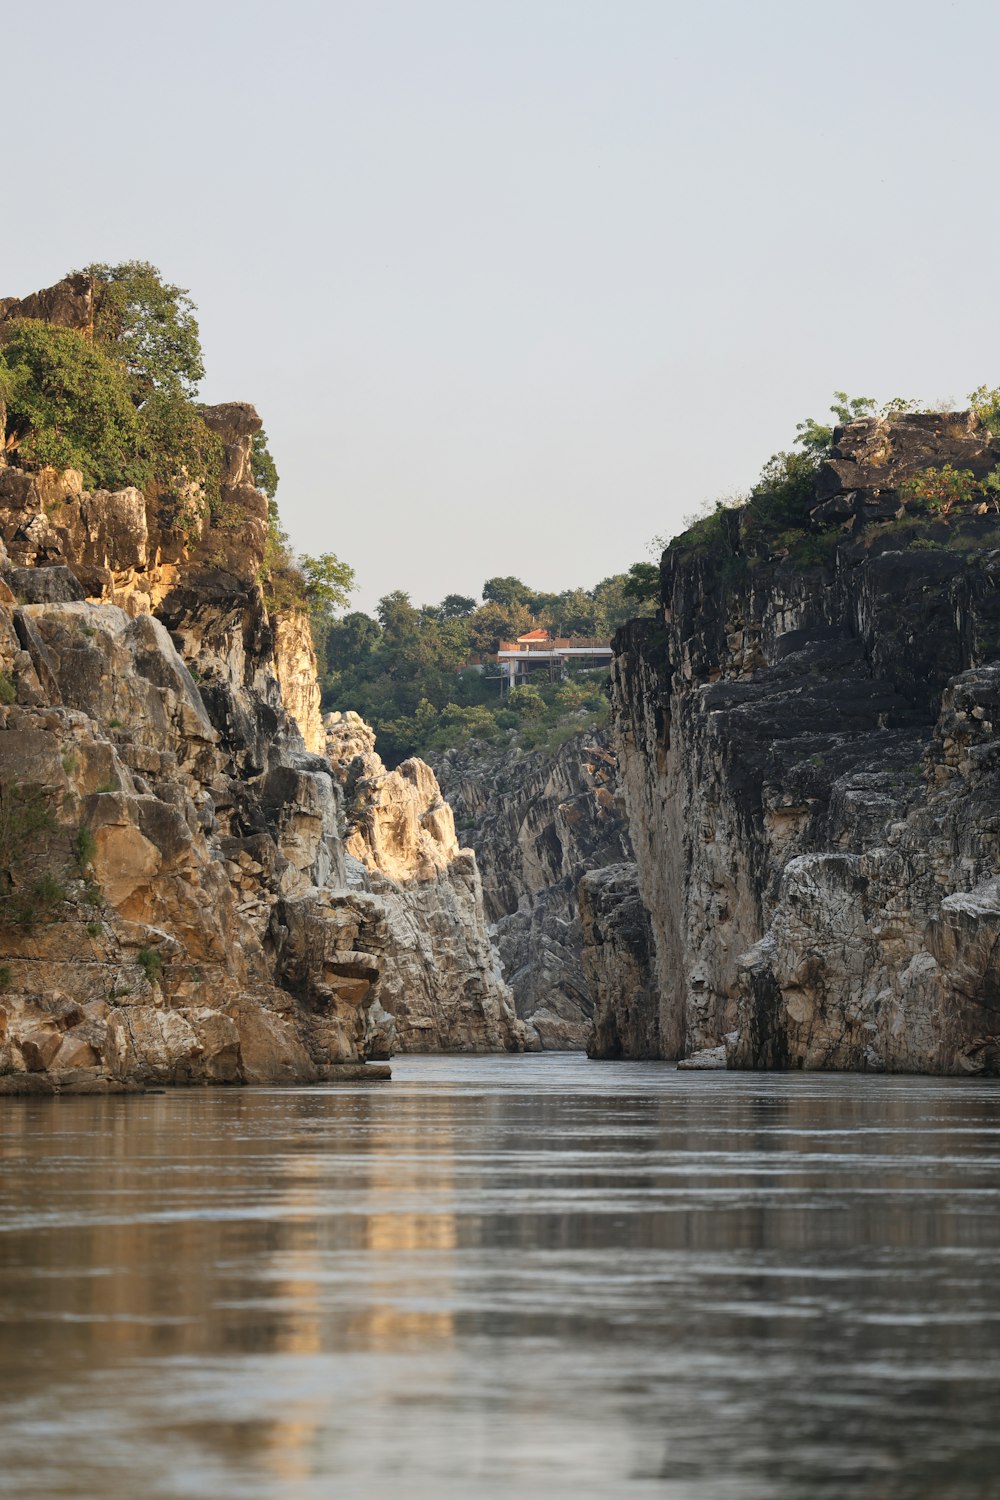 a large body of water surrounded by rocky cliffs